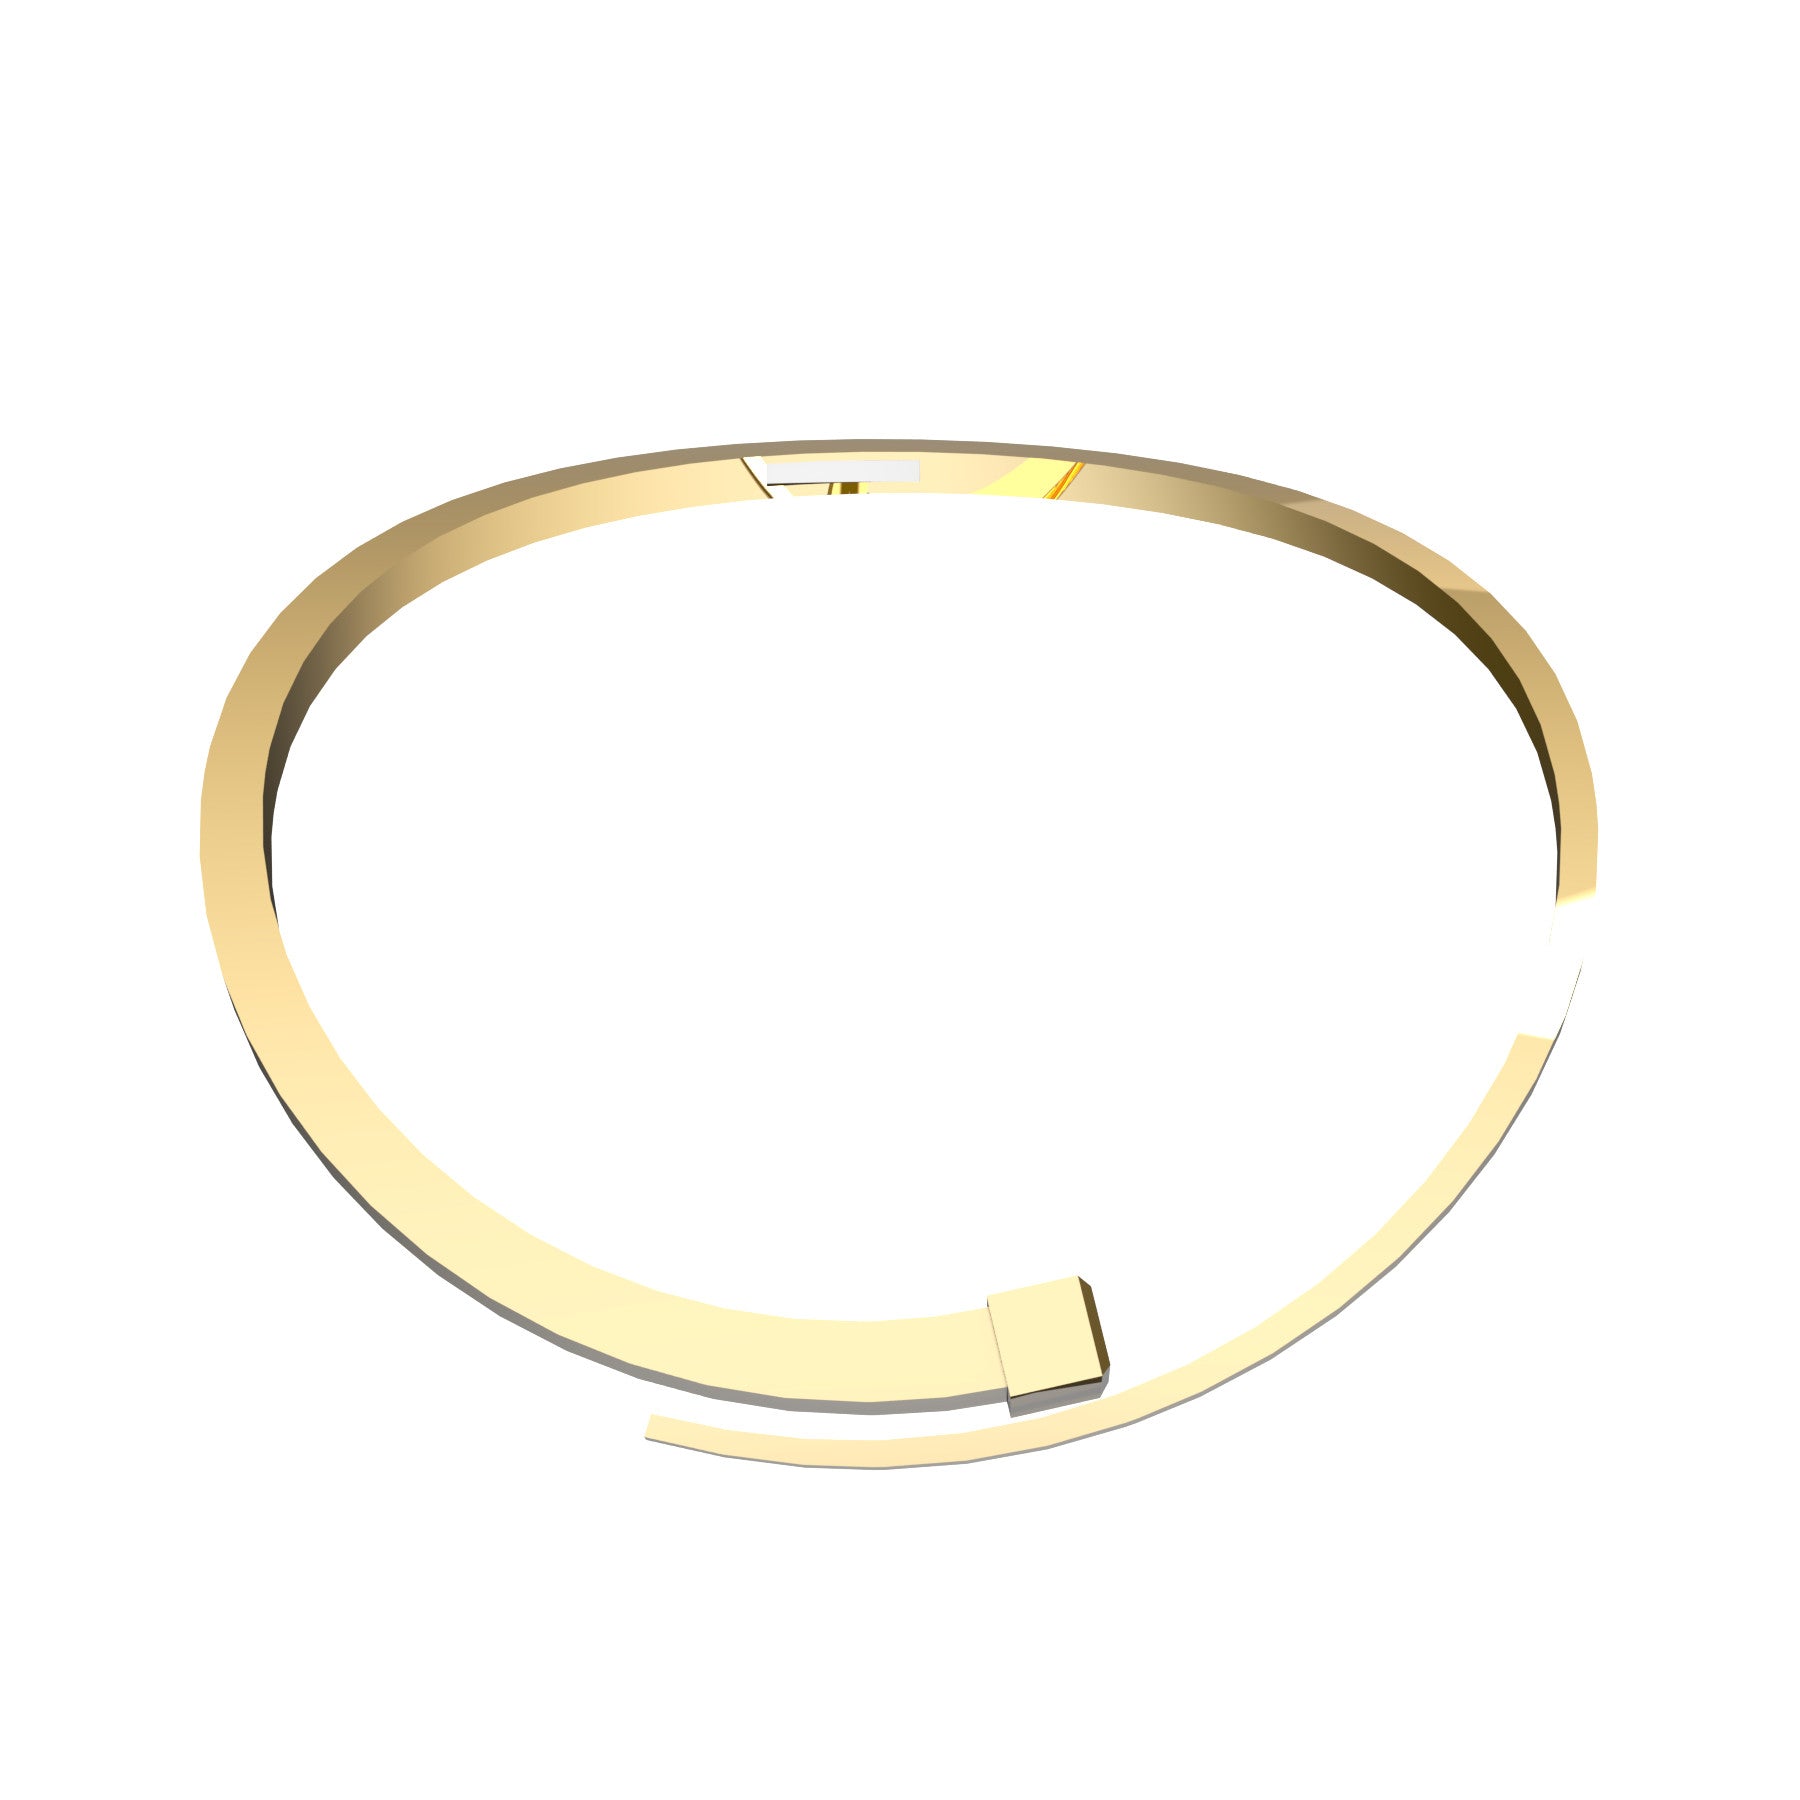 lucky nail necklace, 18 K yellow gold, weight about 55,3 to 71,0 g (1.95 to 2.50 oz), width 8 mm max